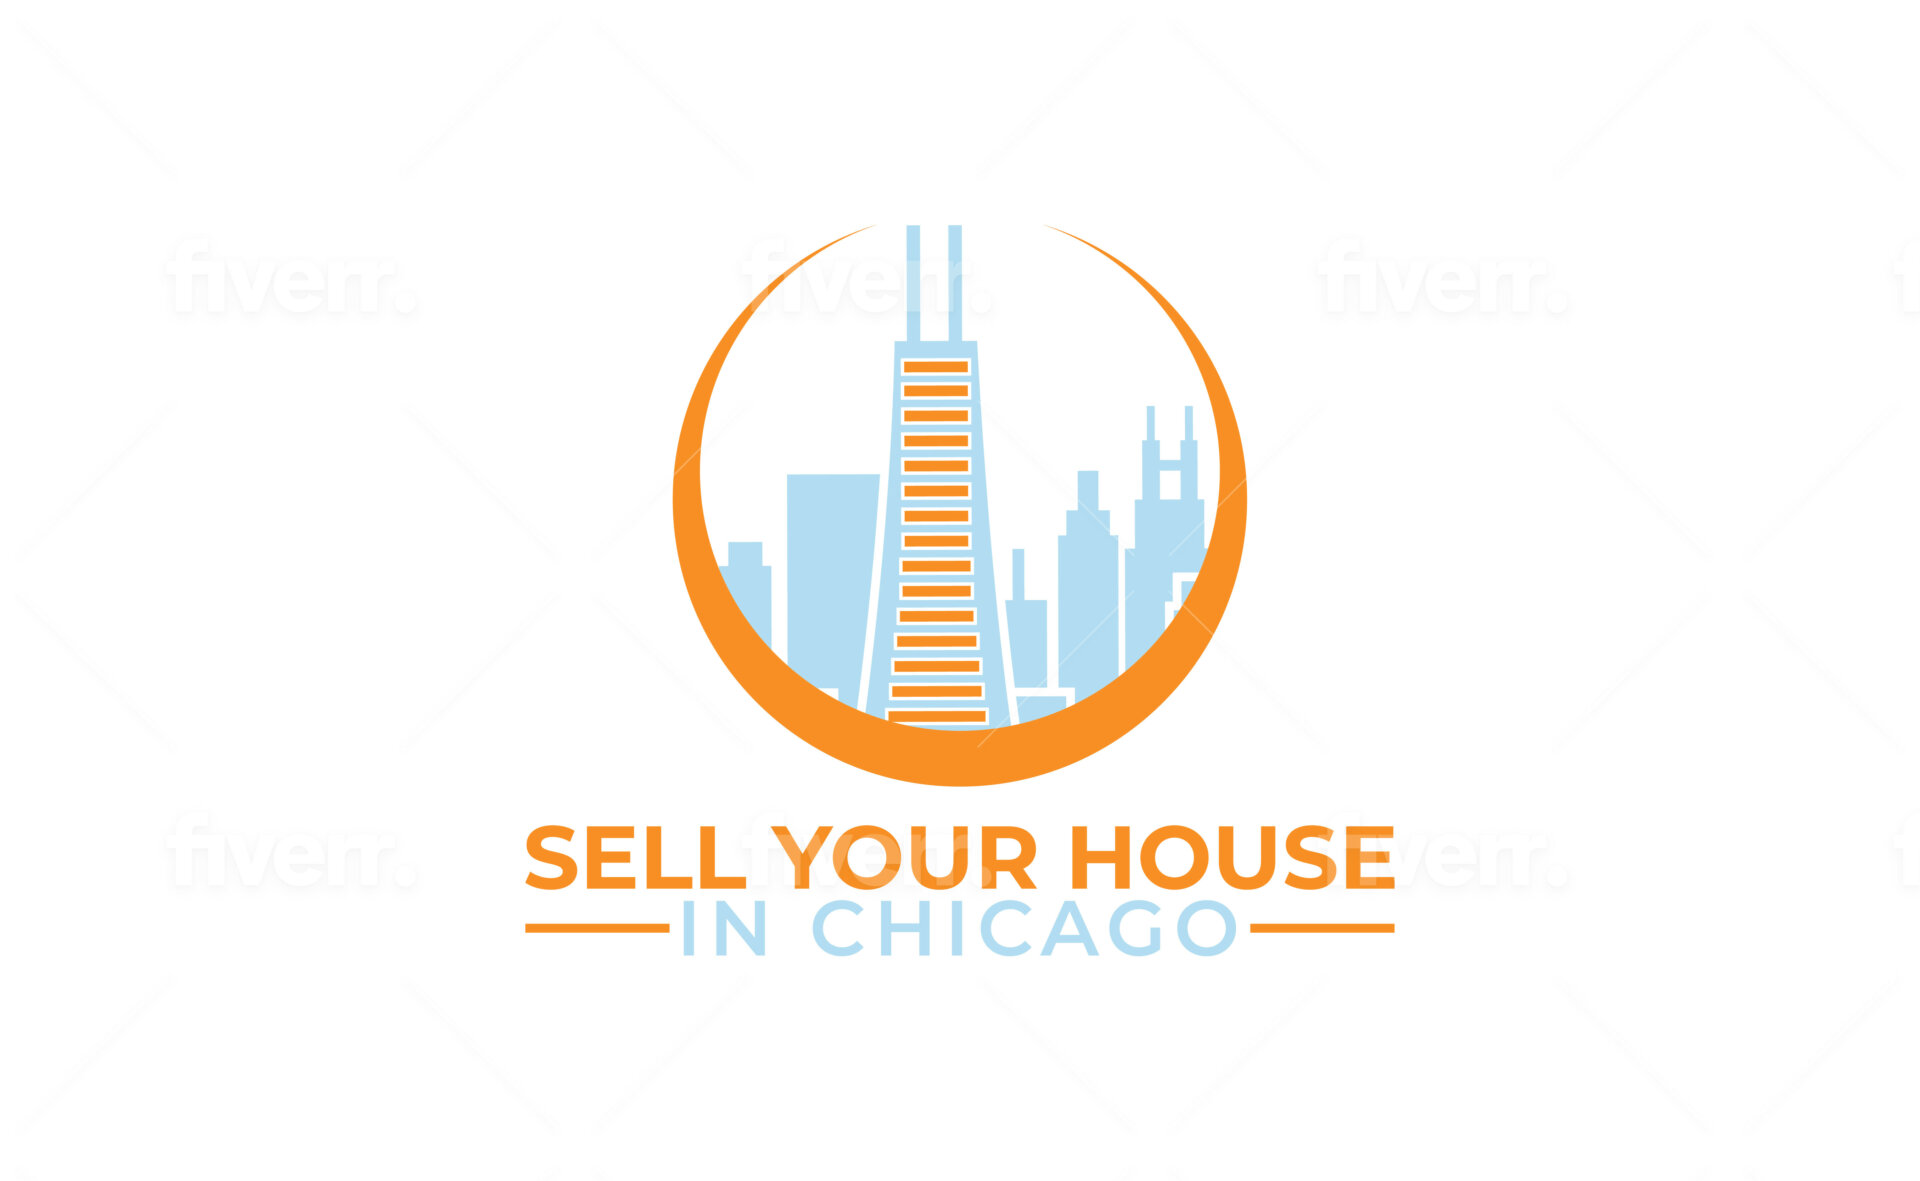 Sell Your House In Chicago logo